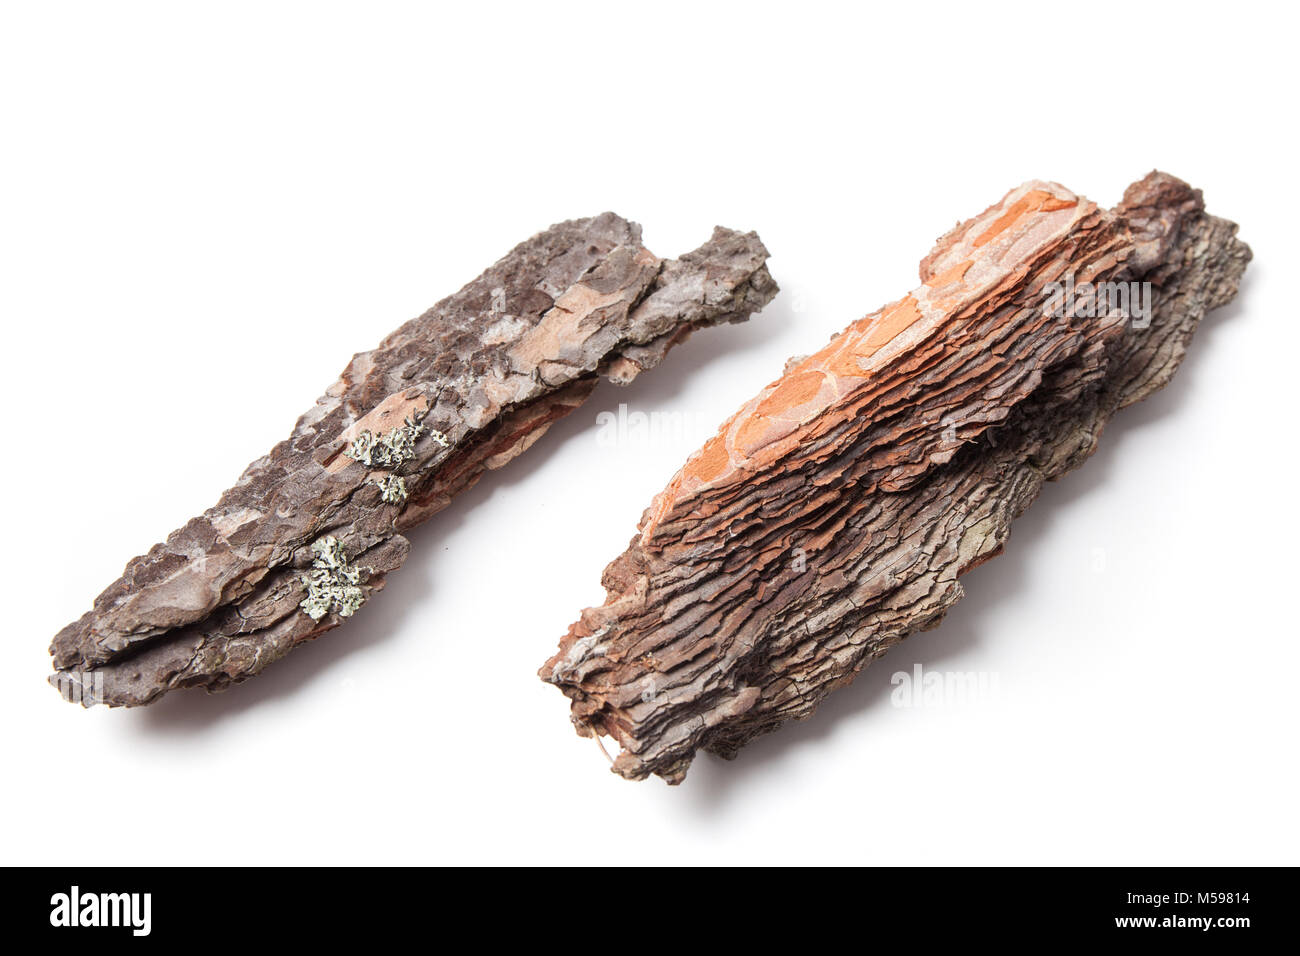 Two pieces of pine bark isolated on white. Stock Photo